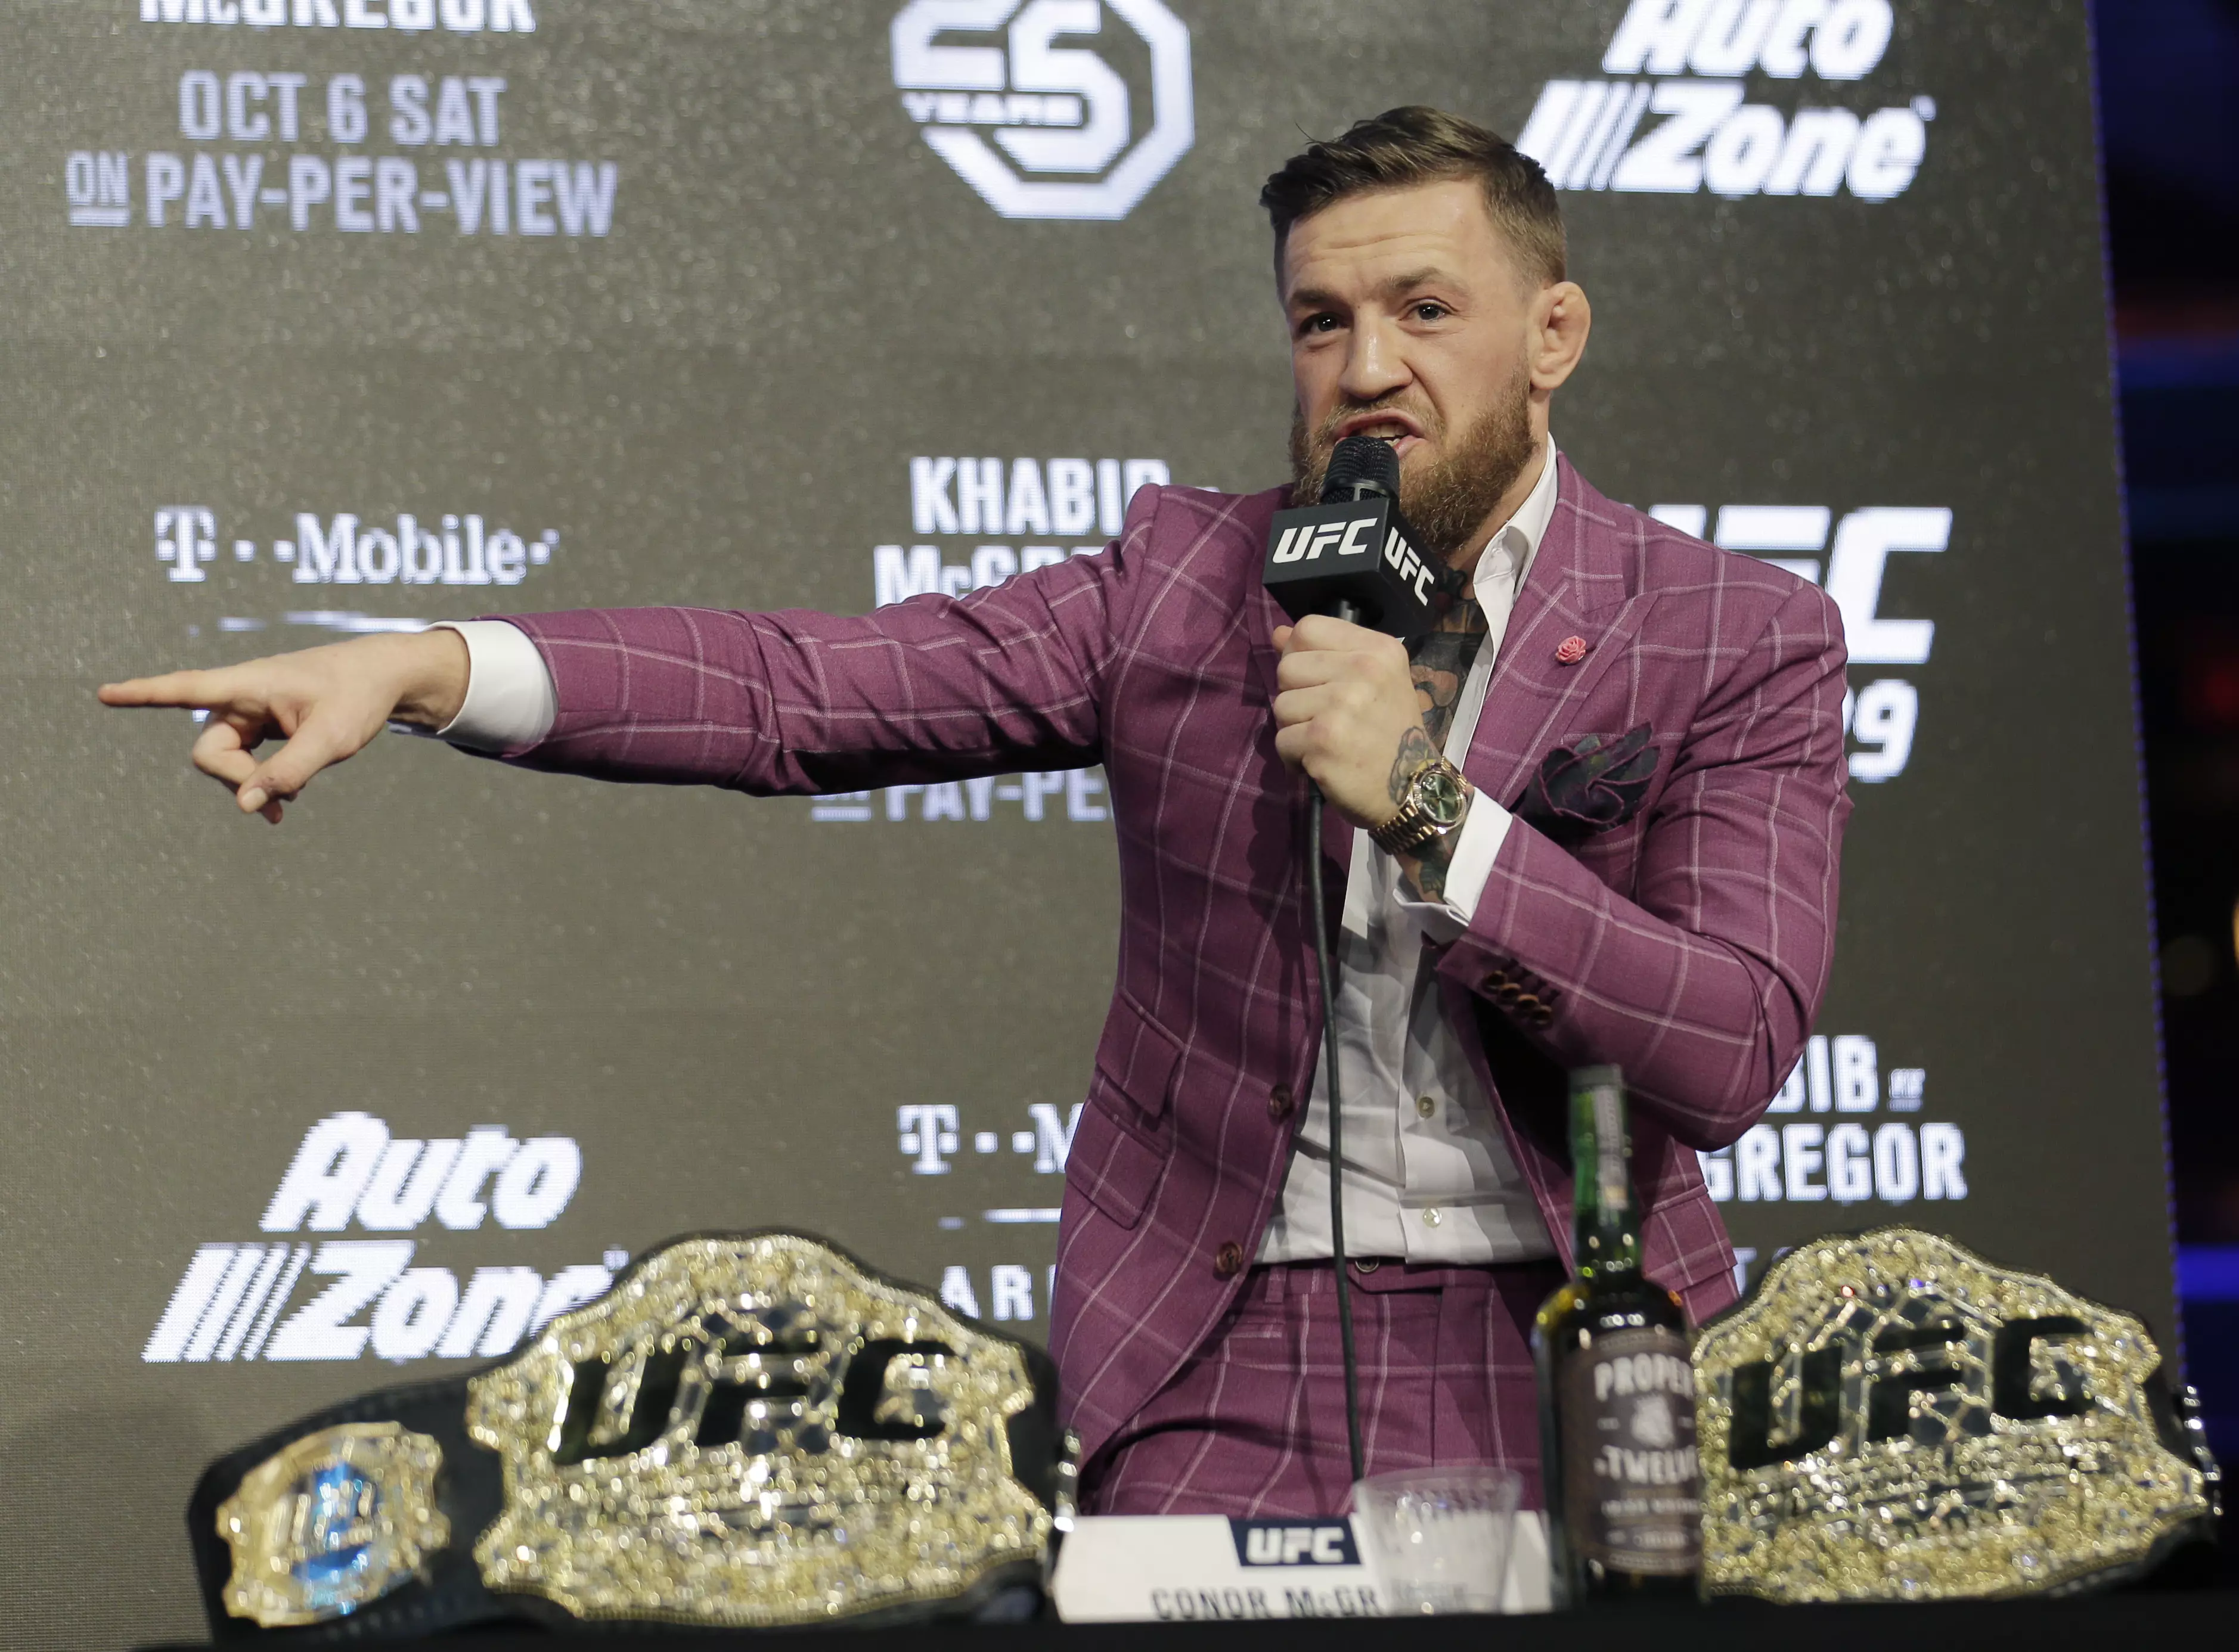 McGregor having a go during the press conference. Image: PA Images